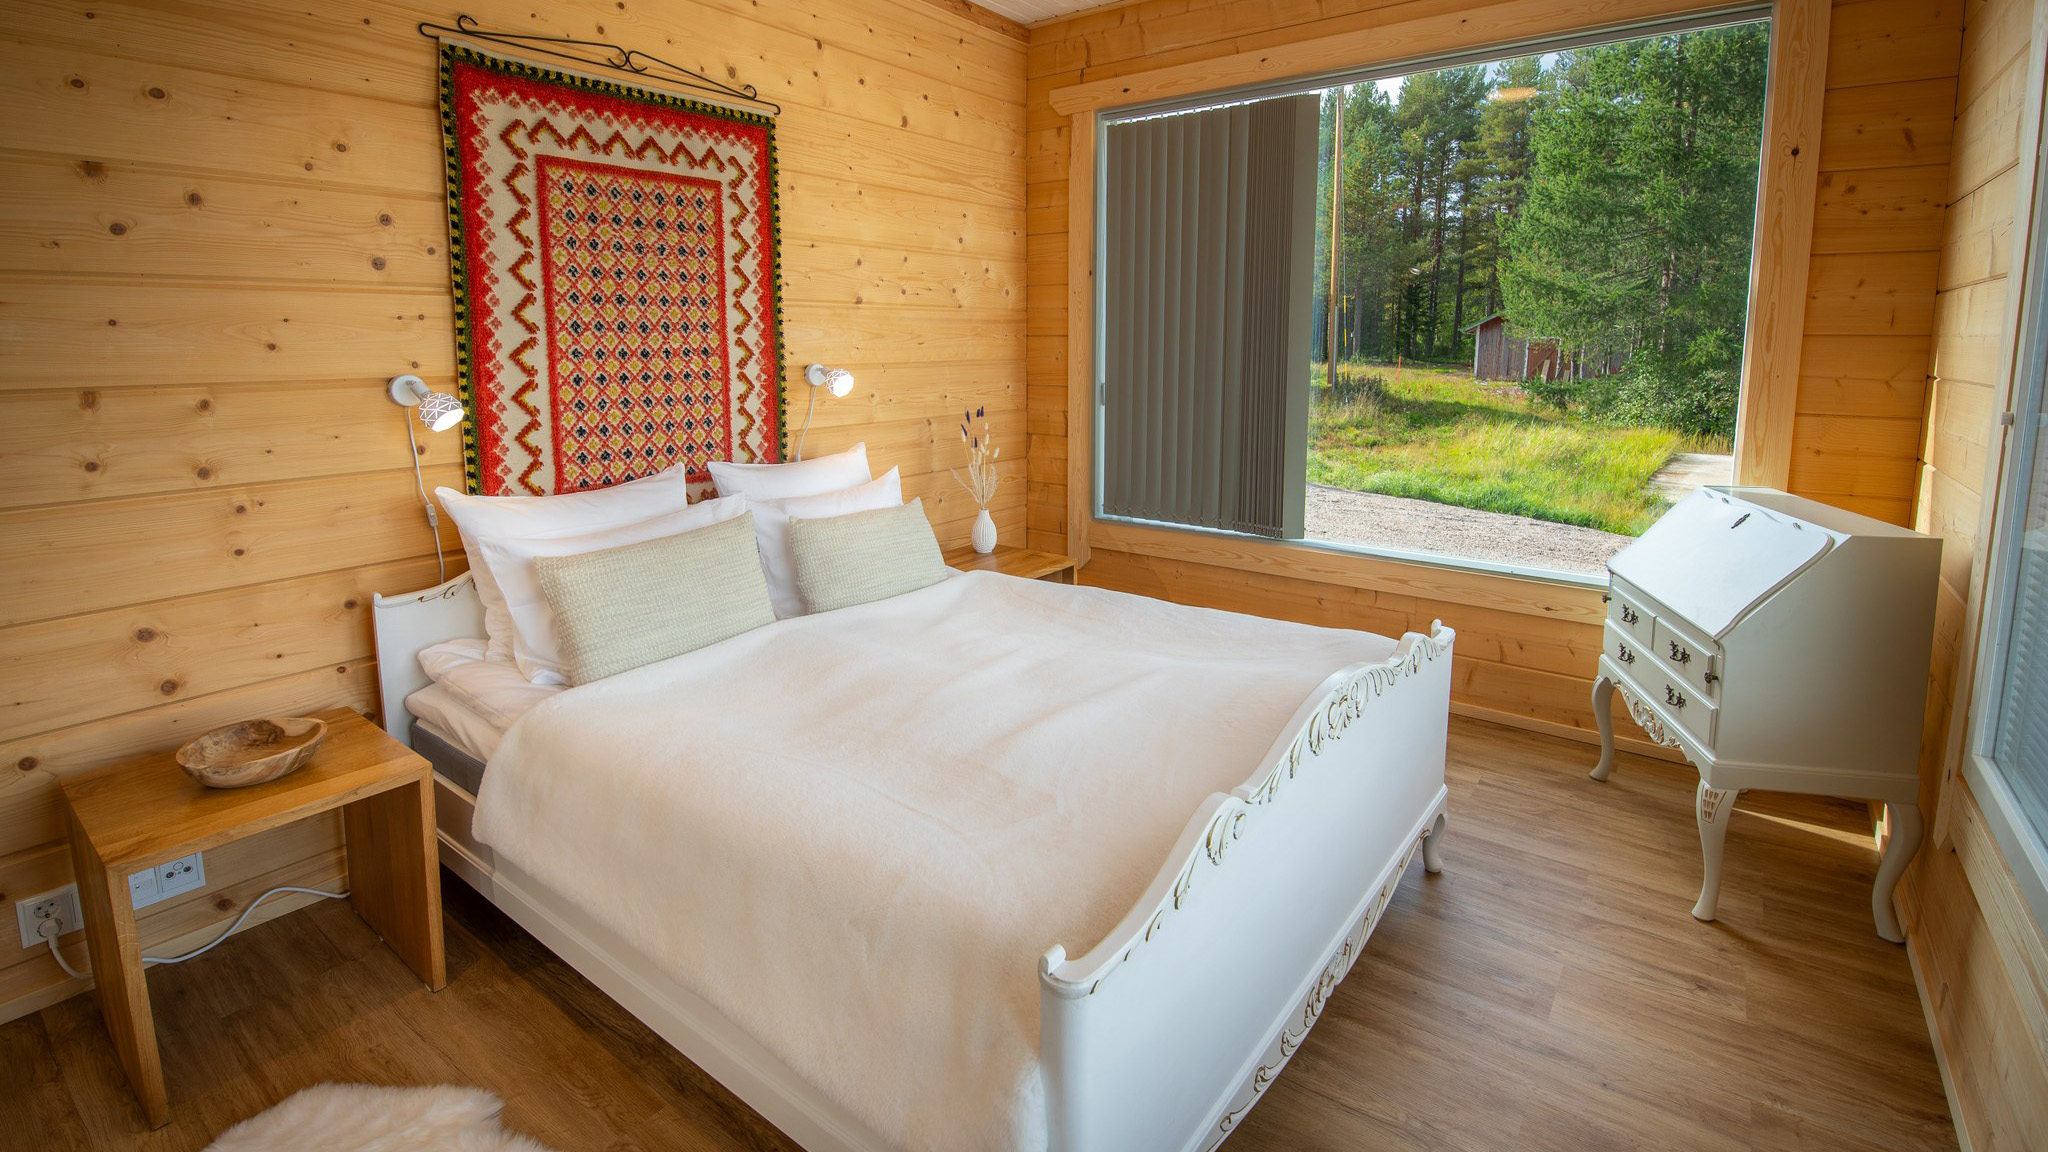 Luxurious Villa Traditionelle accommodates also larger families and groups byt he beautiful Lake in Lapland. | Lapland Luxury